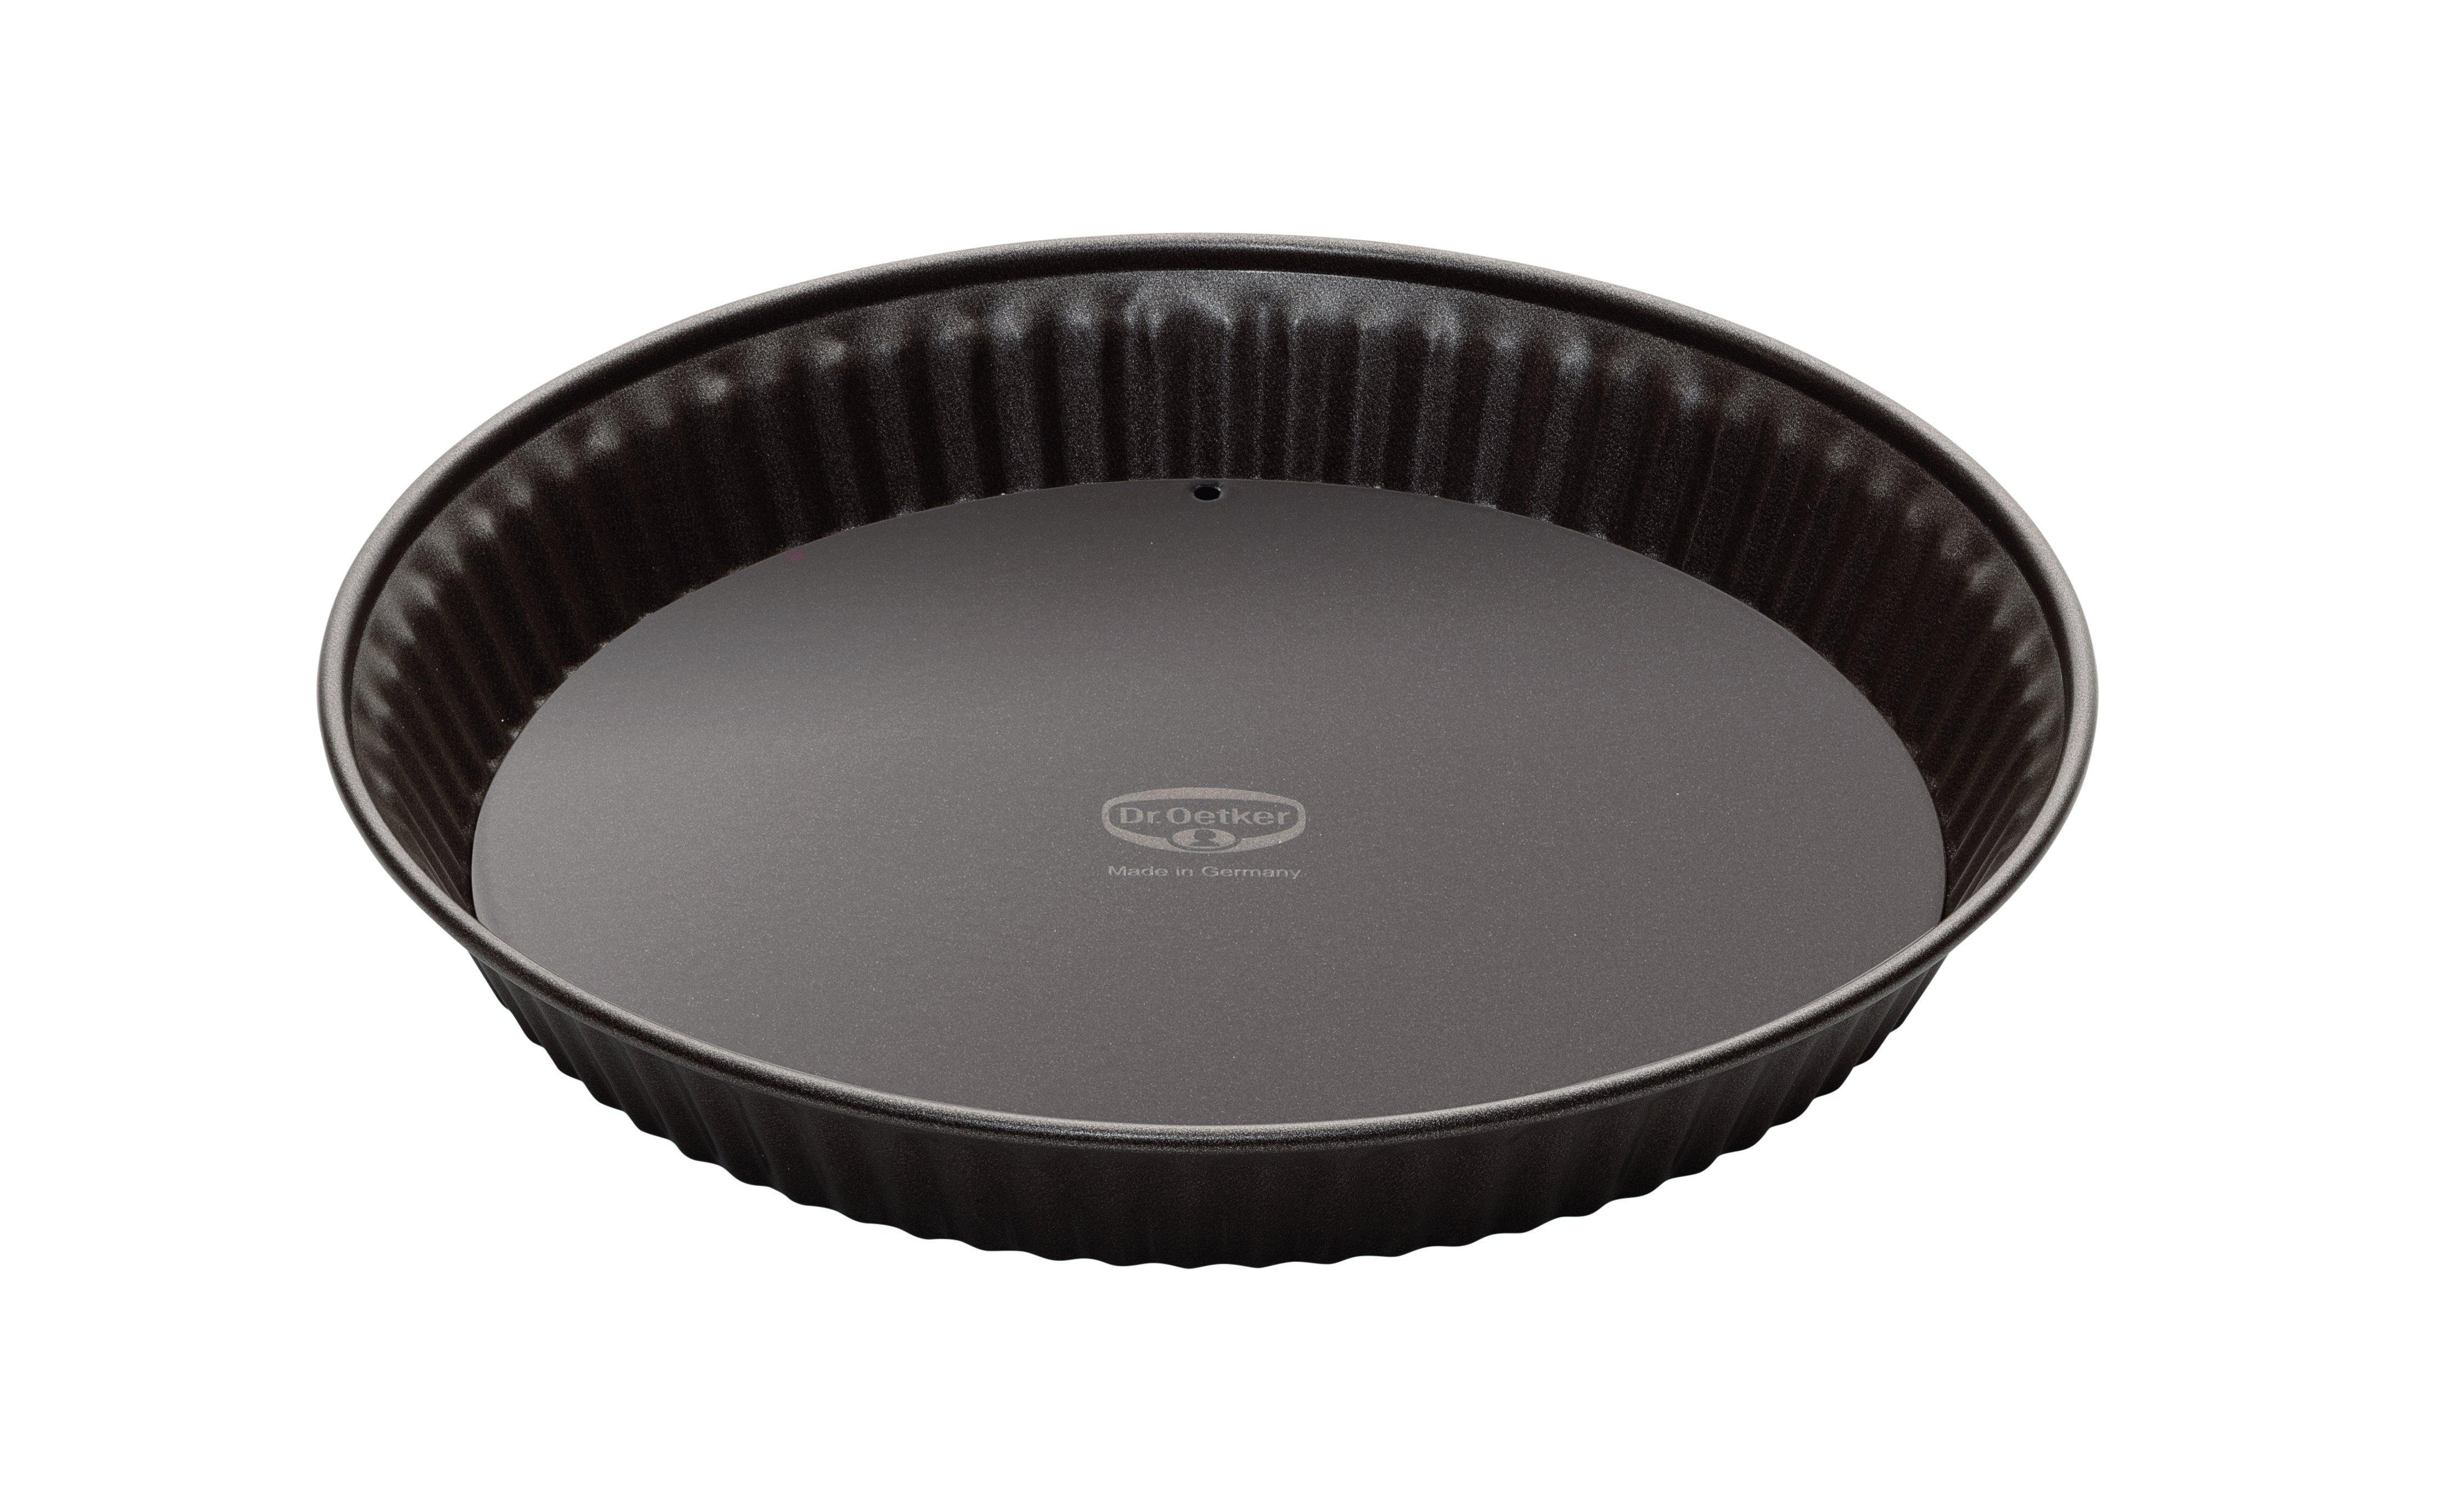 Dr. Oetker "Back-Edition" Tart Tin With Removable Enamel Base, Brown, 28X5 Cm - Whole and All